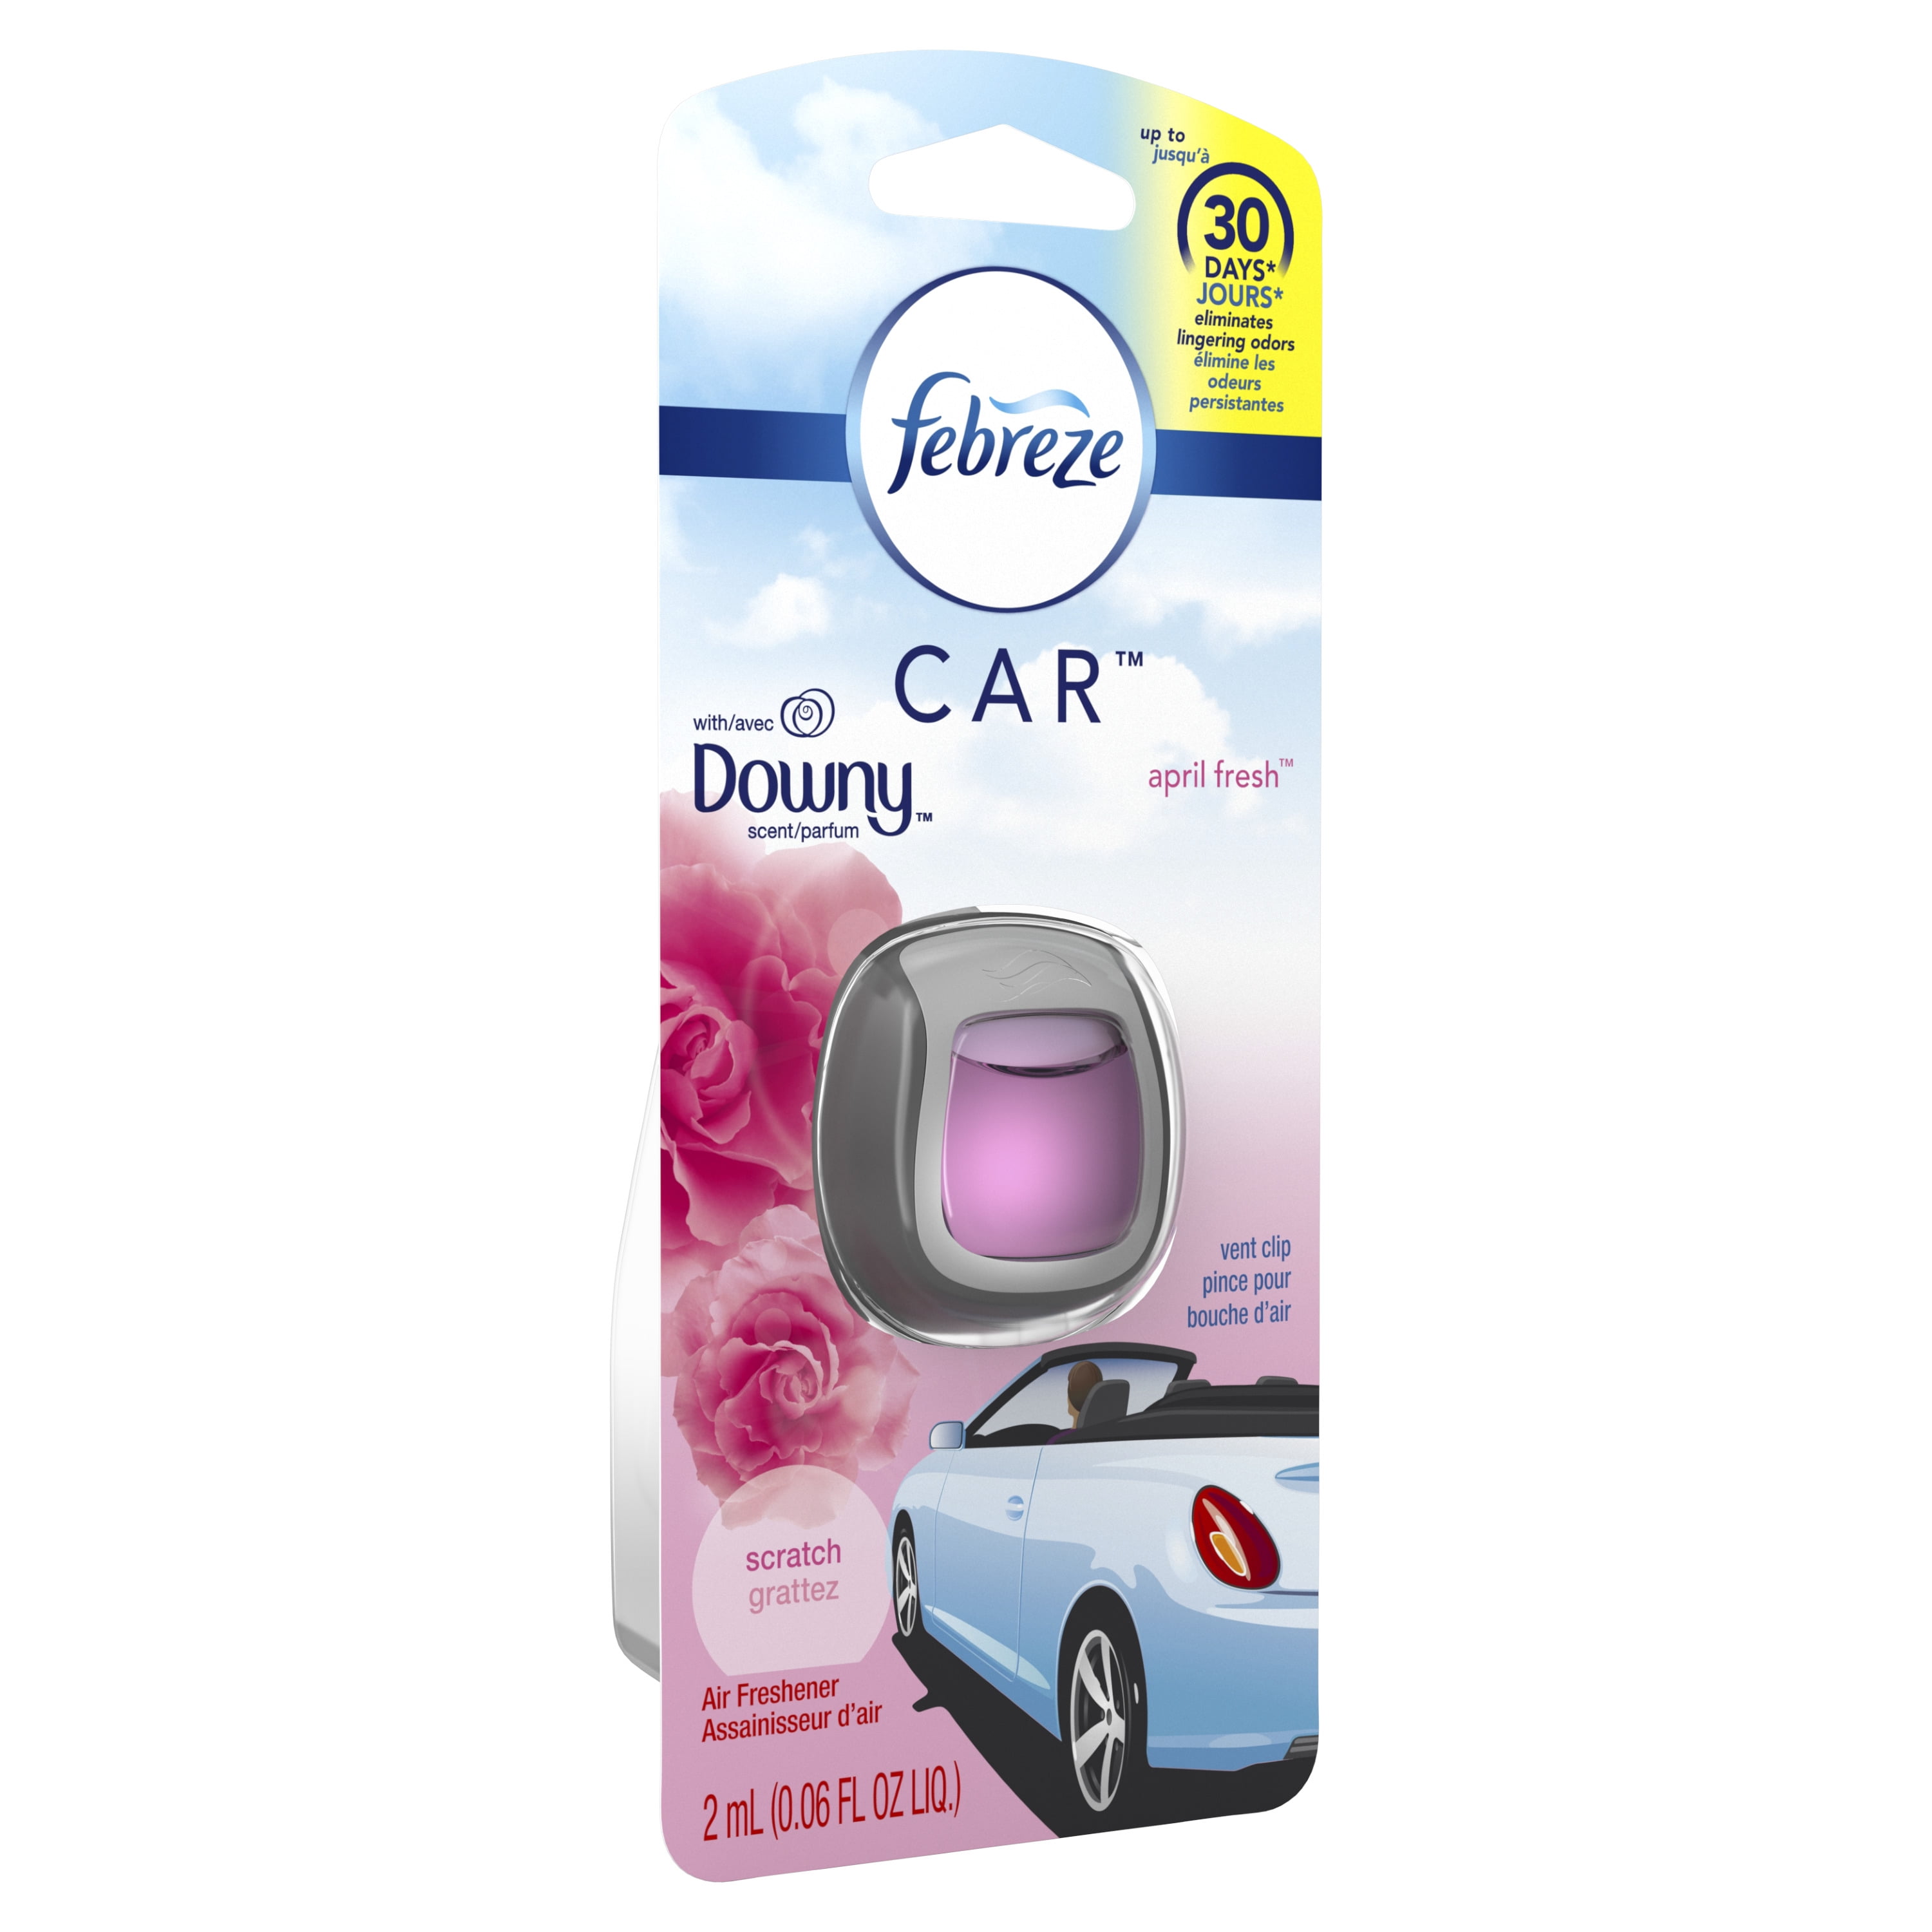 Febreze Car Air Freshener Vent Clip with Downy Scent, April Fresh, 1 Count  